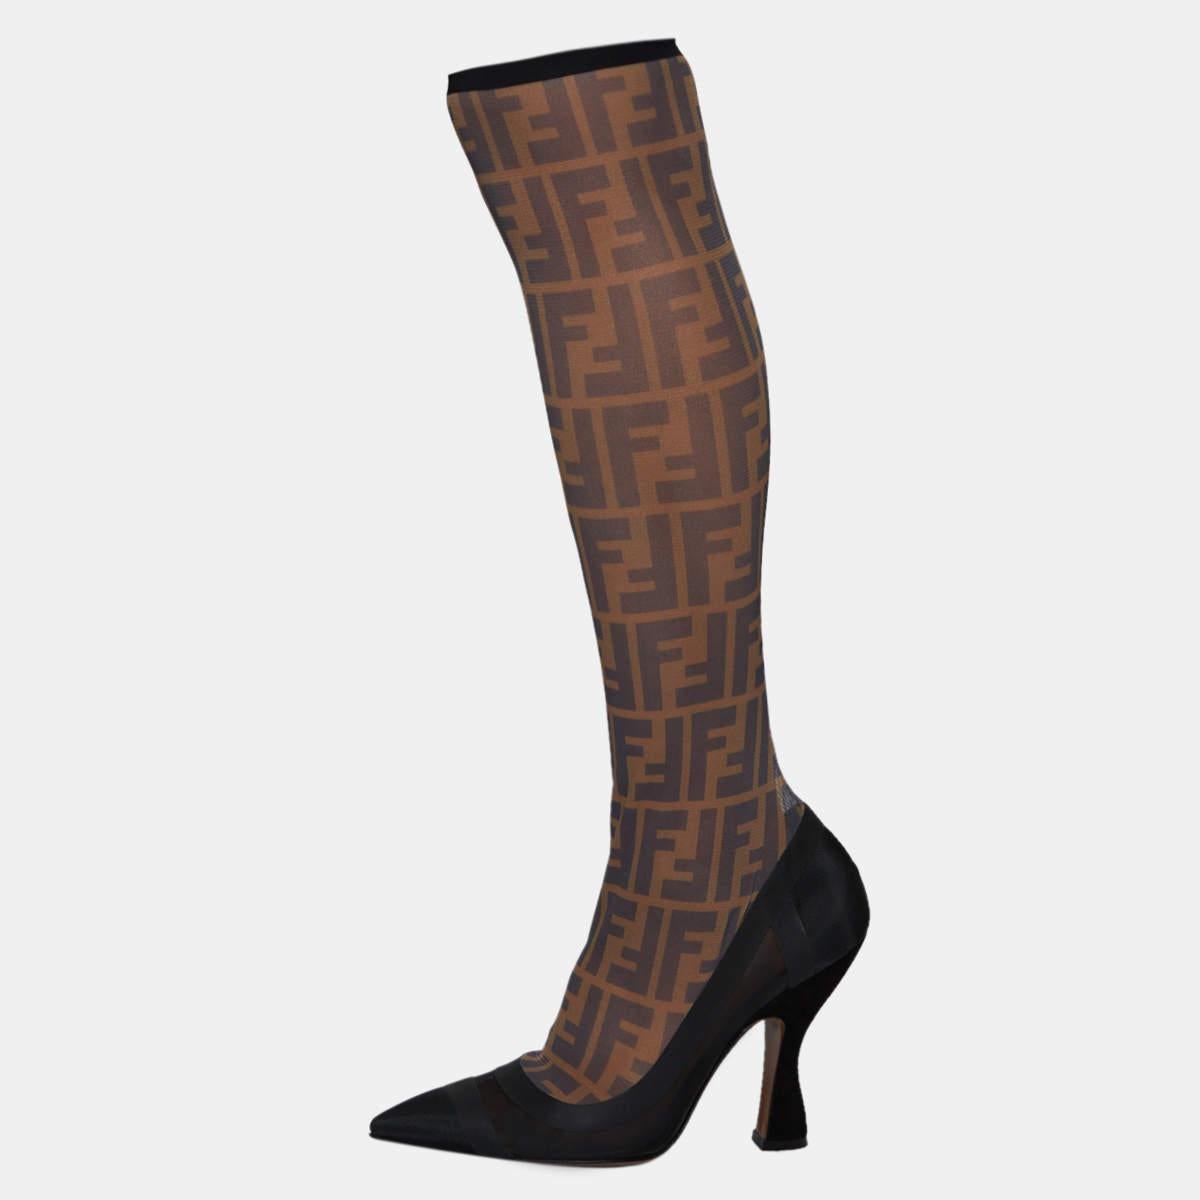 These striking and signature Colibri boots are for women who love Fendi! These knee-length boots are crafted from Zucca mesh and fabric and come in lovely hues of black & beige. The pointed toes, sleek 10.5 cm heels and leather soles add to the pair